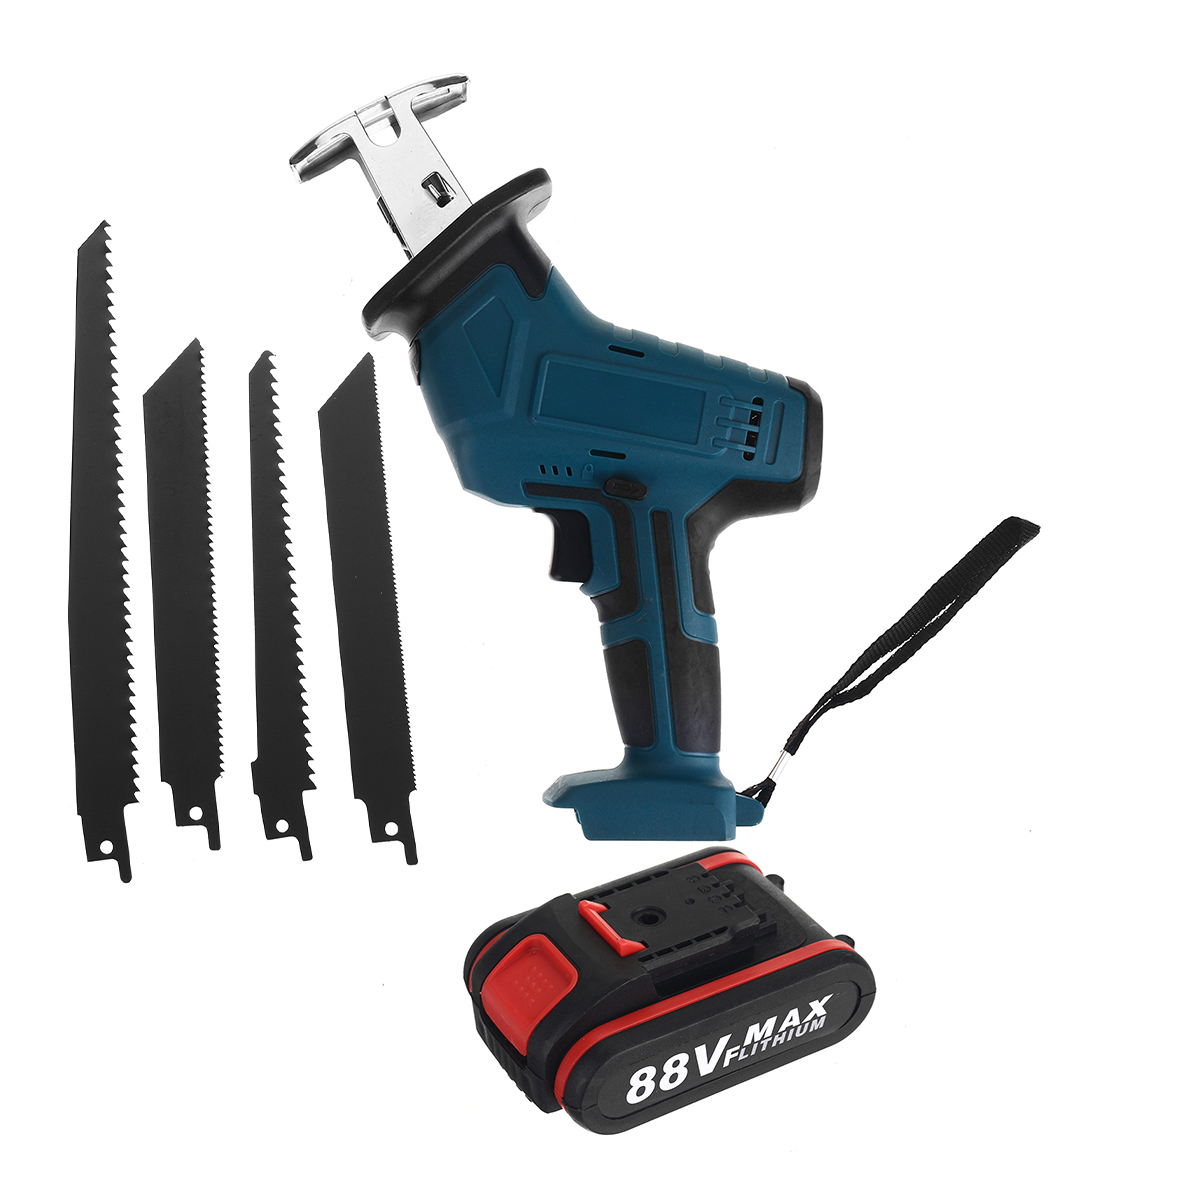 Cordless-Reciprocating-Saw-With-4-Blades-Rechargeable-Electric-Saw-for-Sawing-Branches-Metal-PVC-Woo-1684064-10